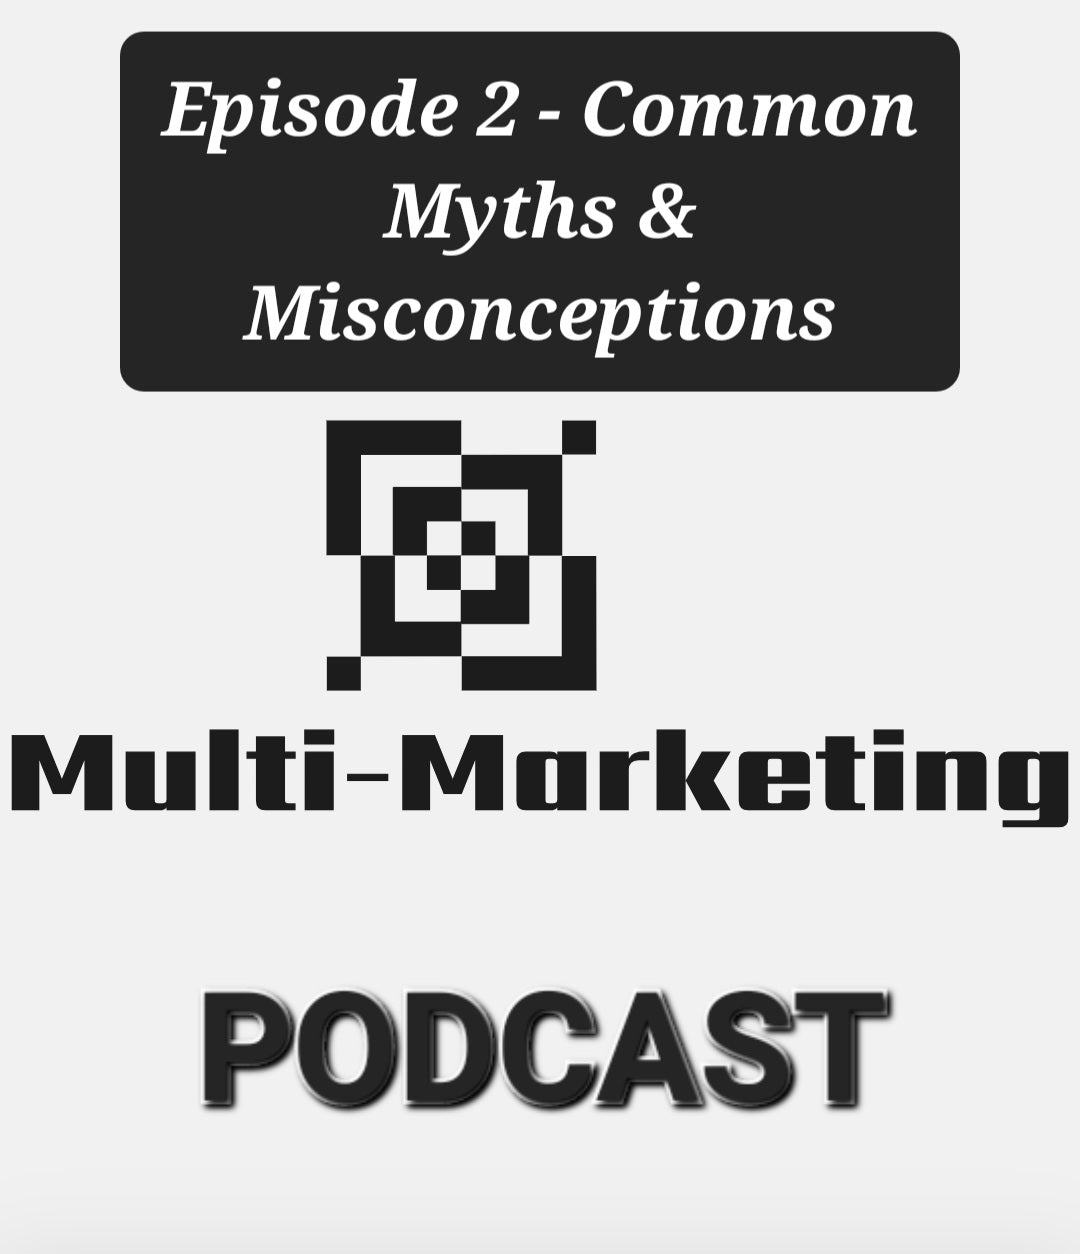 Multi-Marketing Podcast - Episode 2: Common Myths & Misconceptions